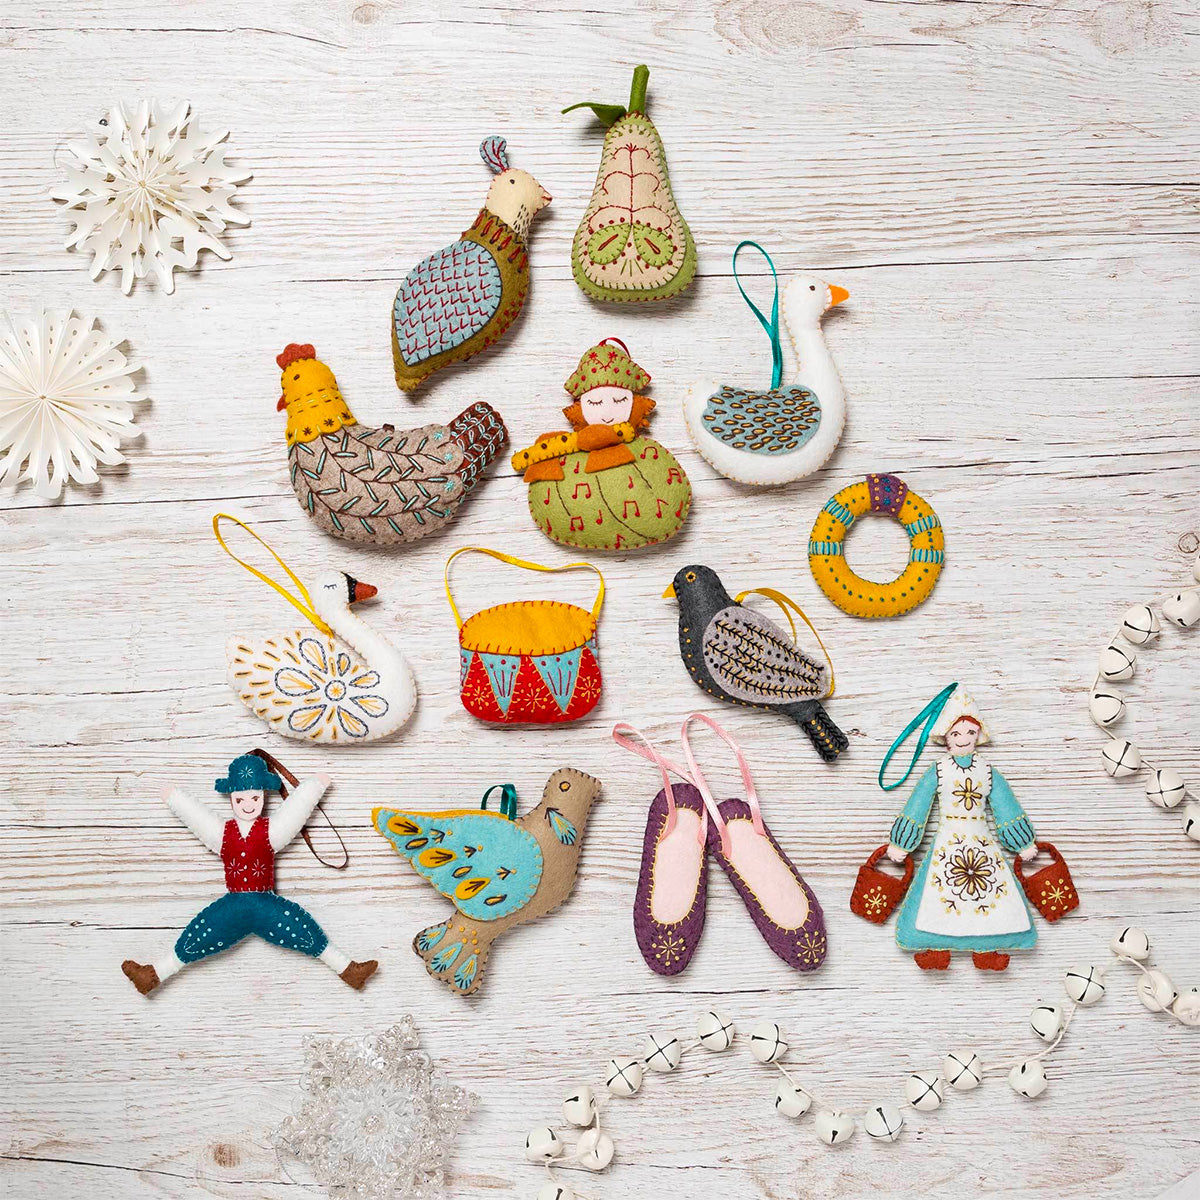 12 Days of Christmas Felt Ornament Kit - Piper Piping - Stitched Modern